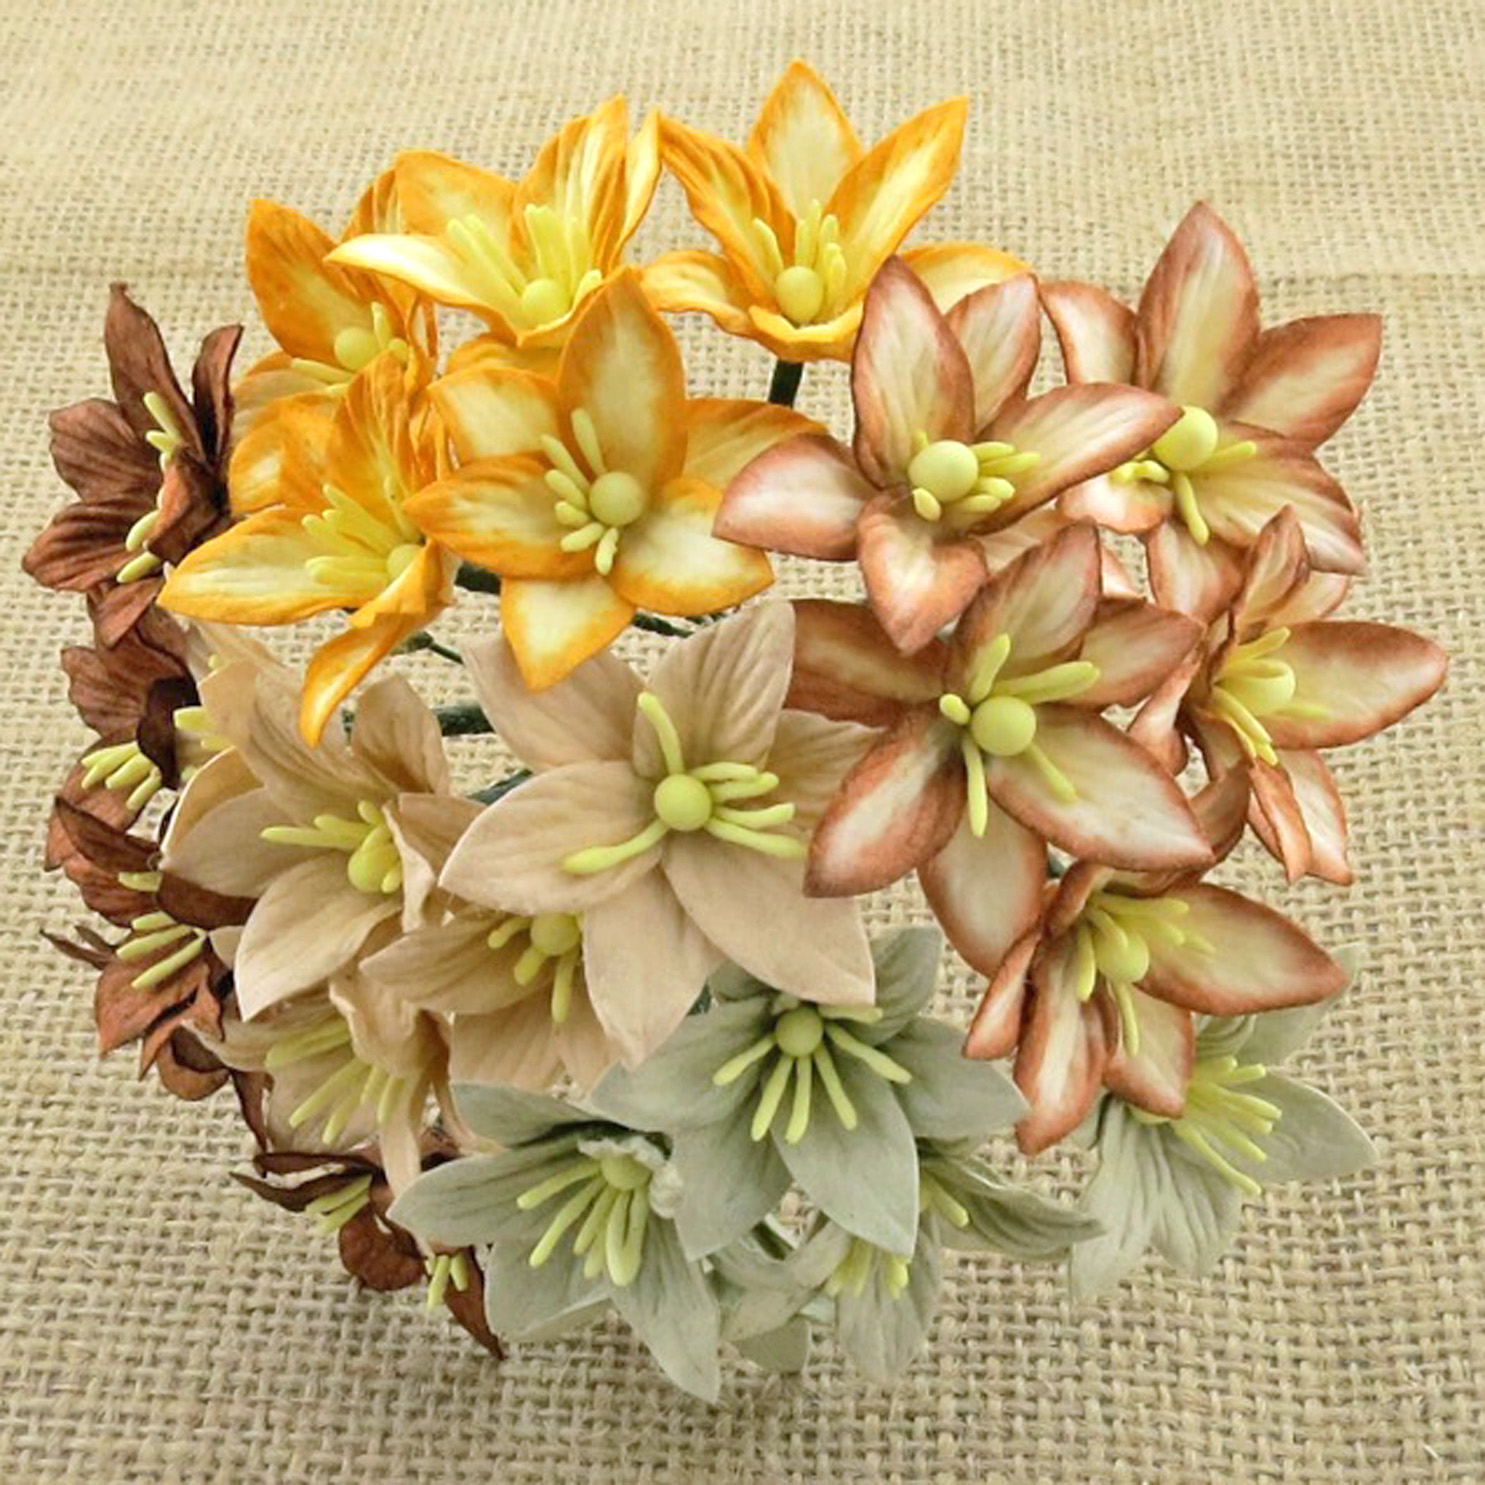 50 MIXED EARTH TONE MULBERRY PAPER LILY FLOWERS - 5 COLOR